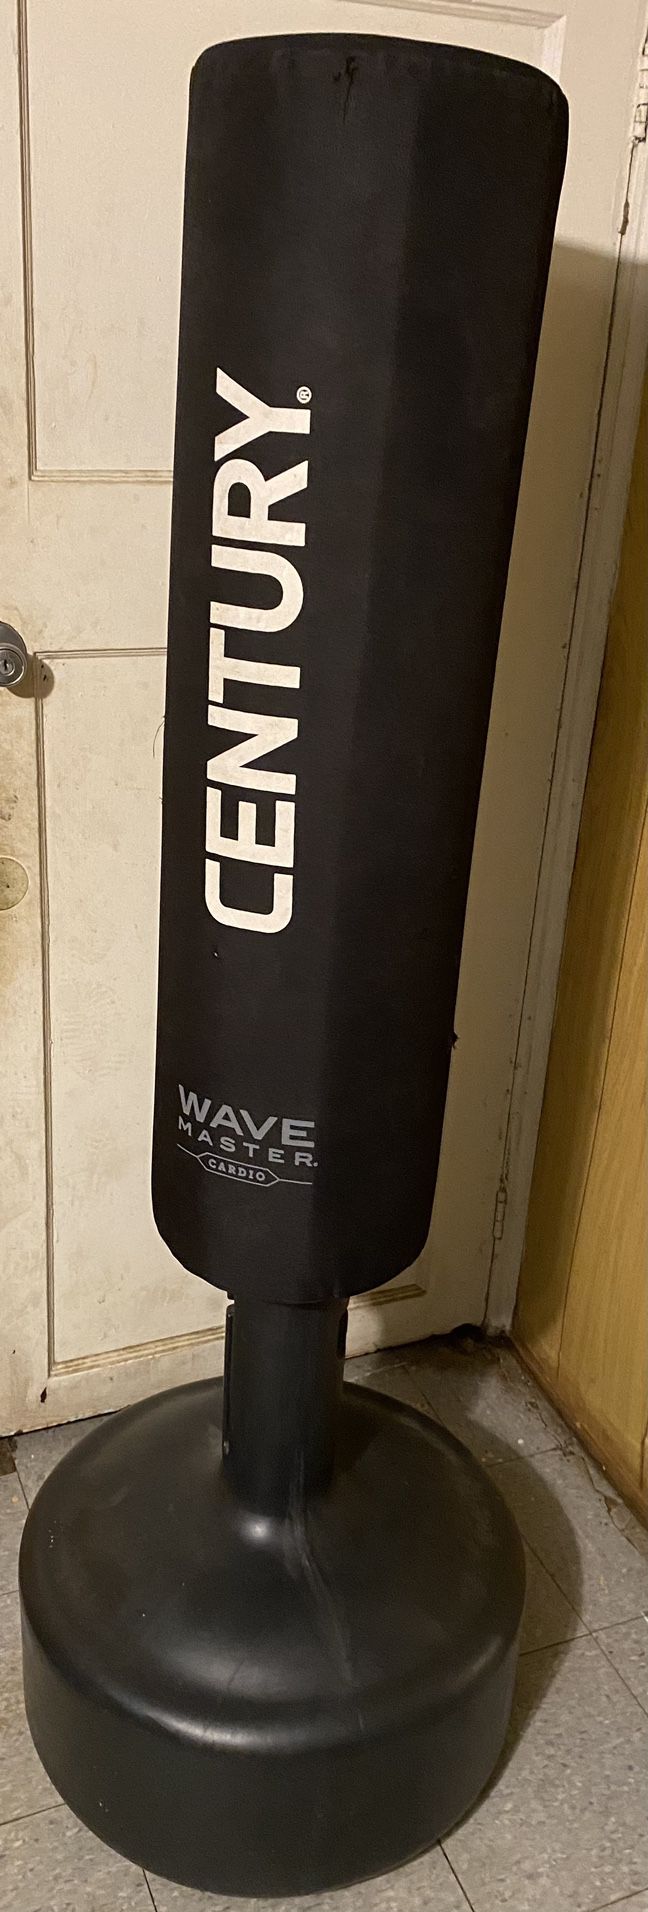 Boxing Bag With Boxing Equipment 